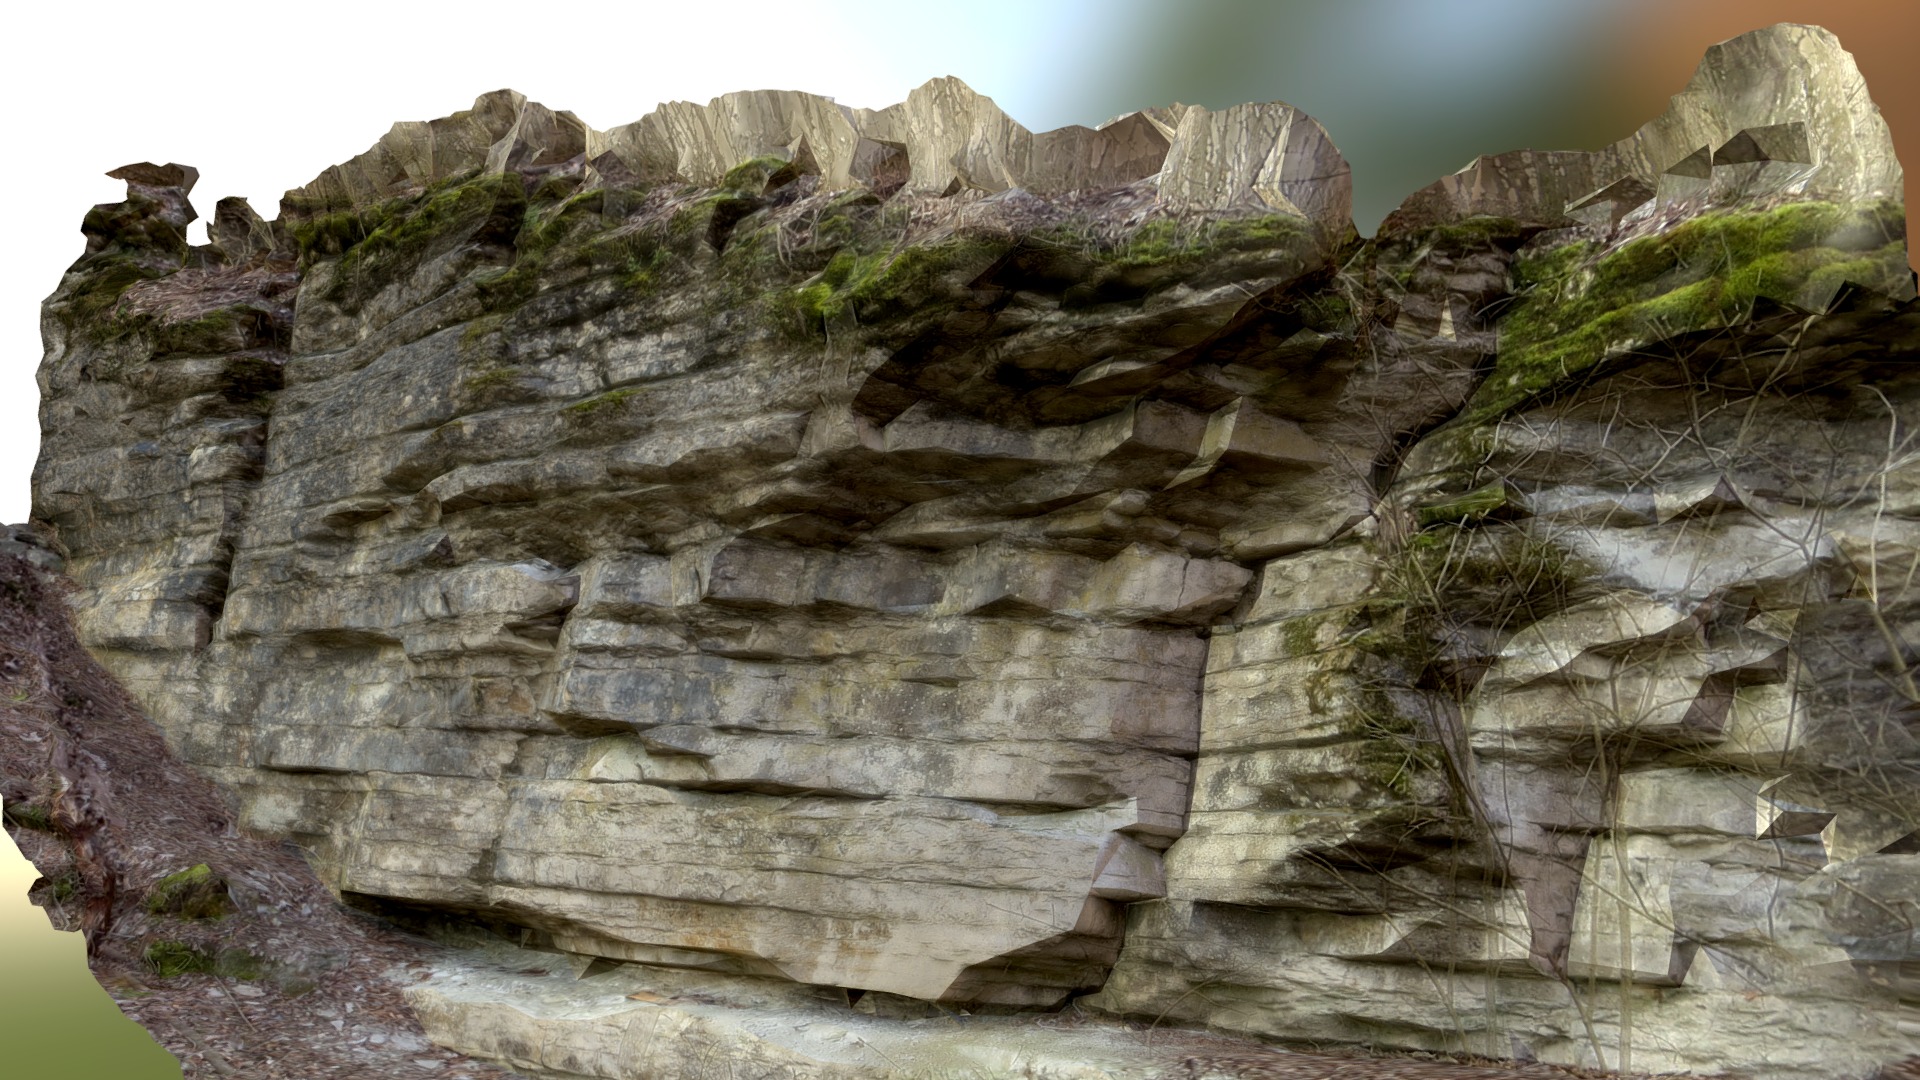 3D model layered rock formation - This is a 3D model of the layered rock formation. The 3D model is about a rocky cliff with grass growing on it.